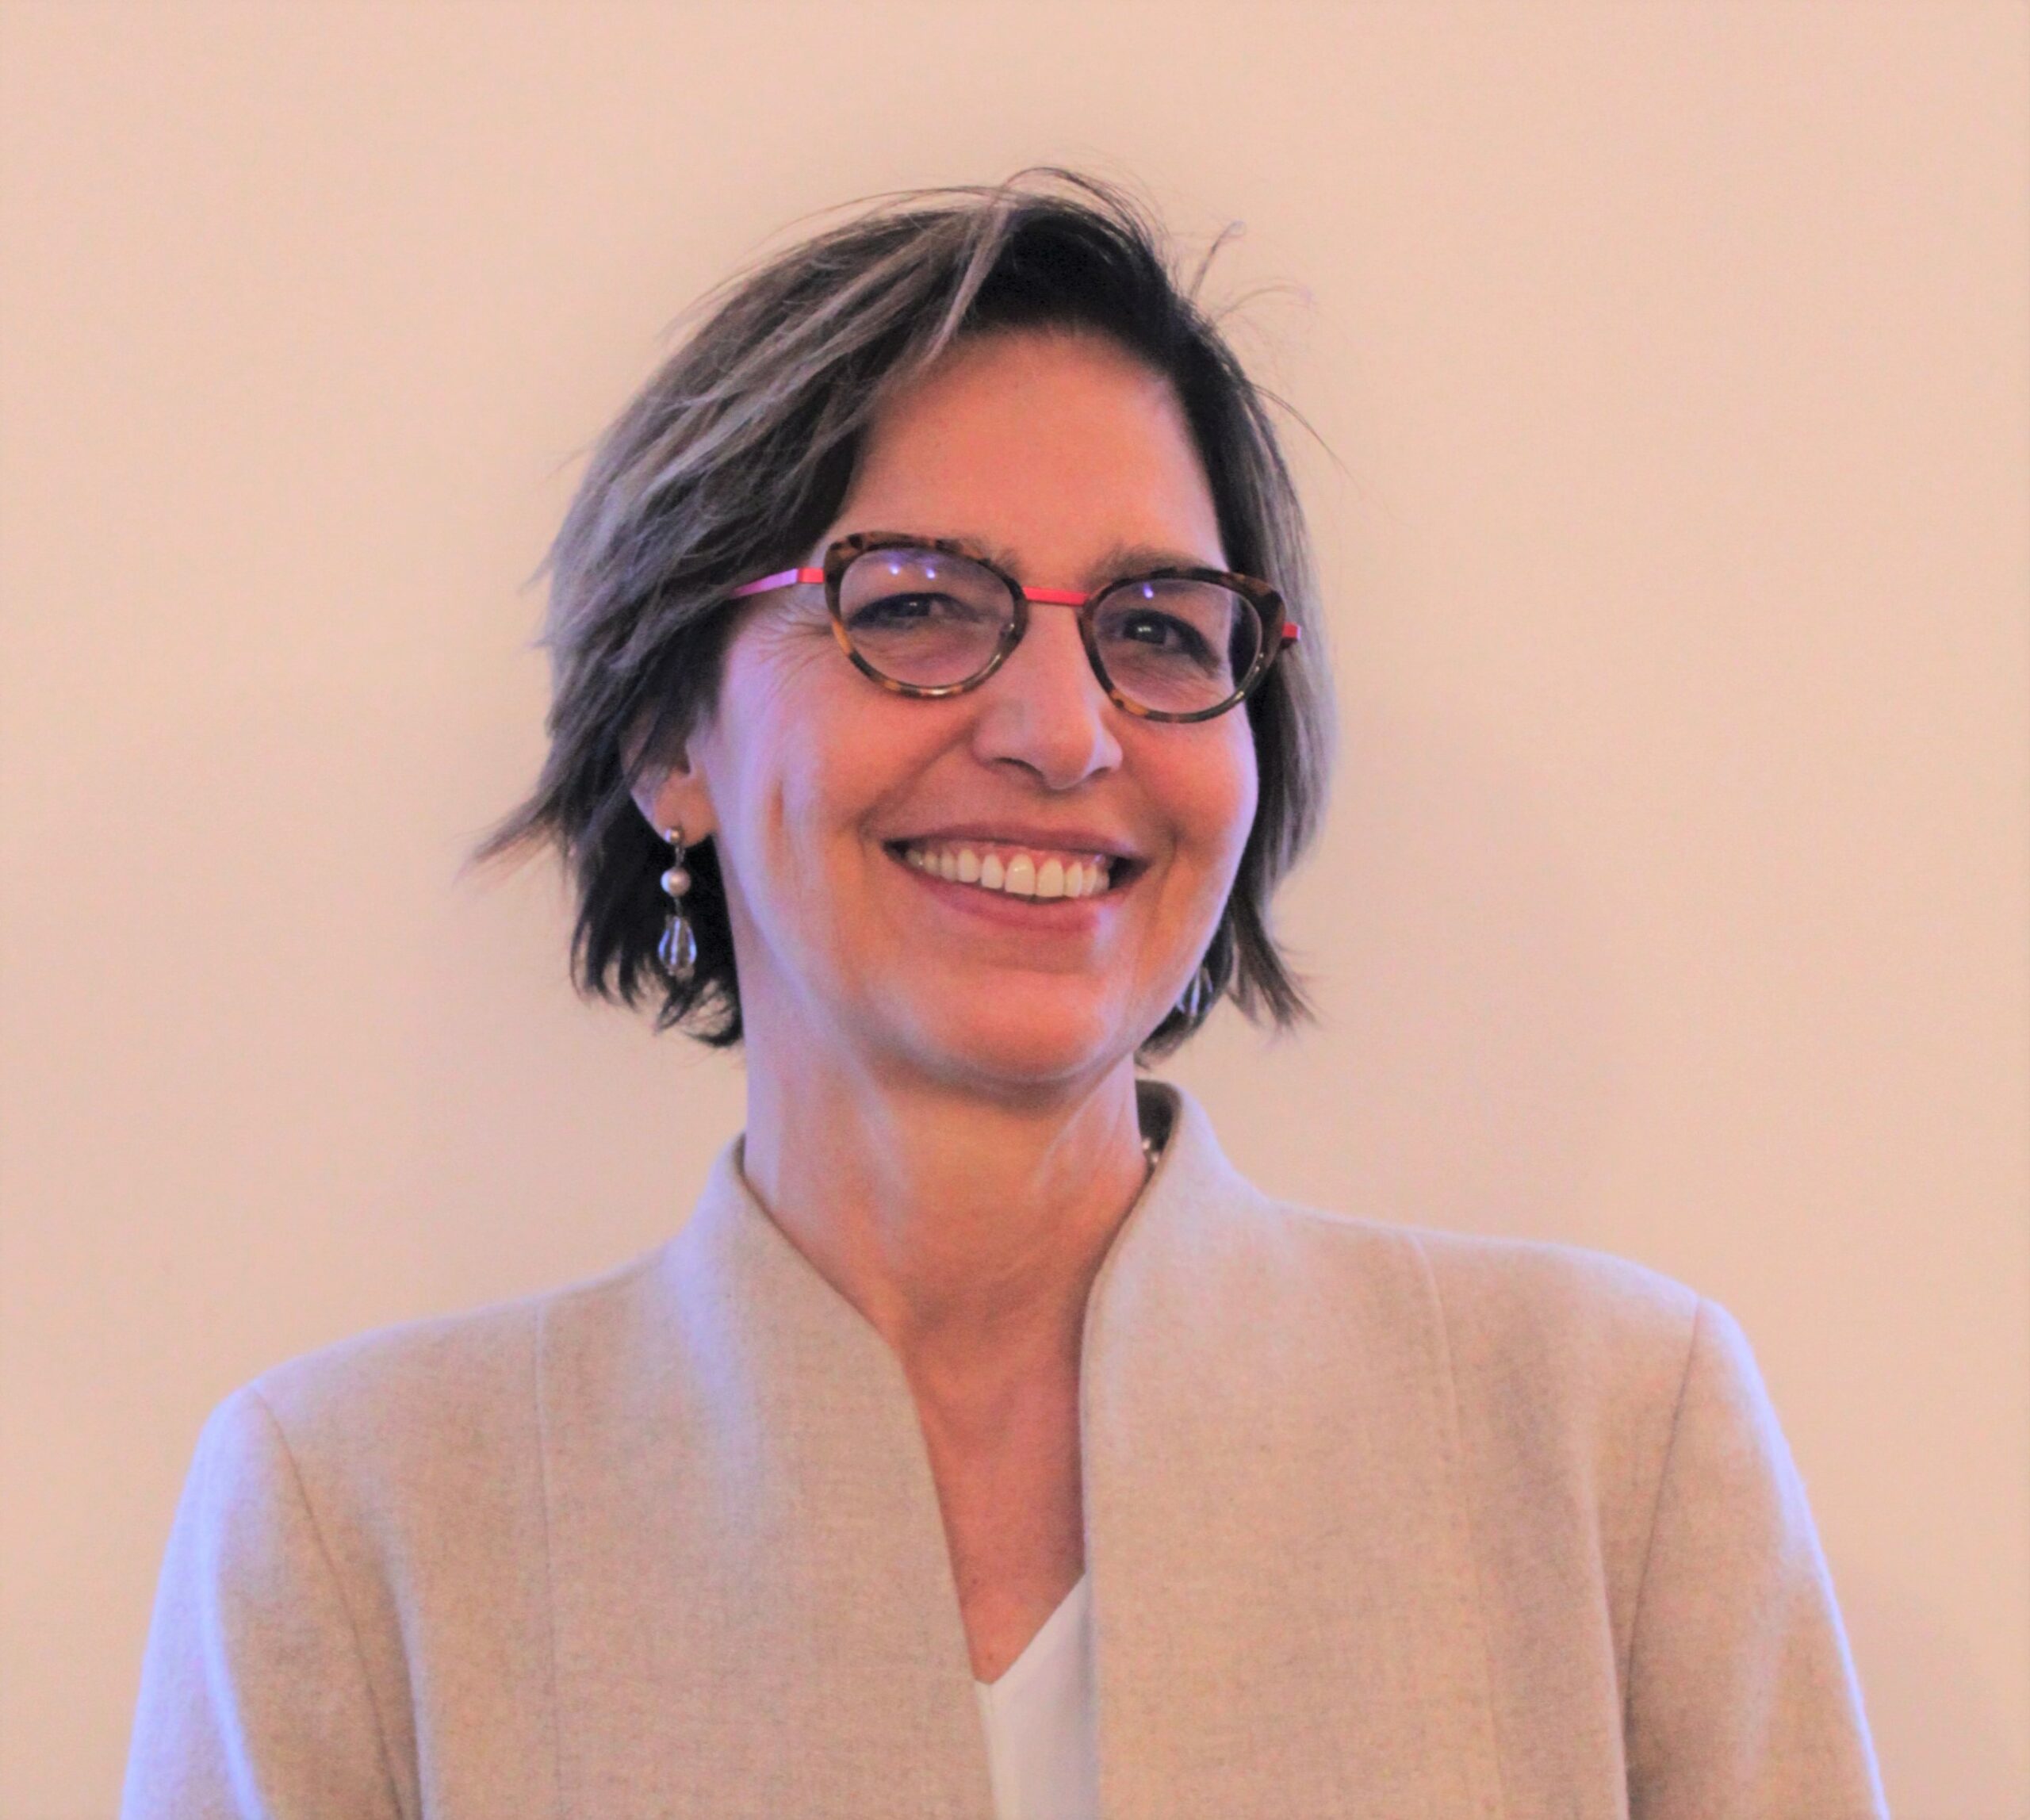 <span style='line-height: 0.6'>Paola Borracchini</span><br />
<span style='color:#00b5e2;font-size:25px;line-height: 0.6 !important;'><br />
Head of Corporate Affairs</span>